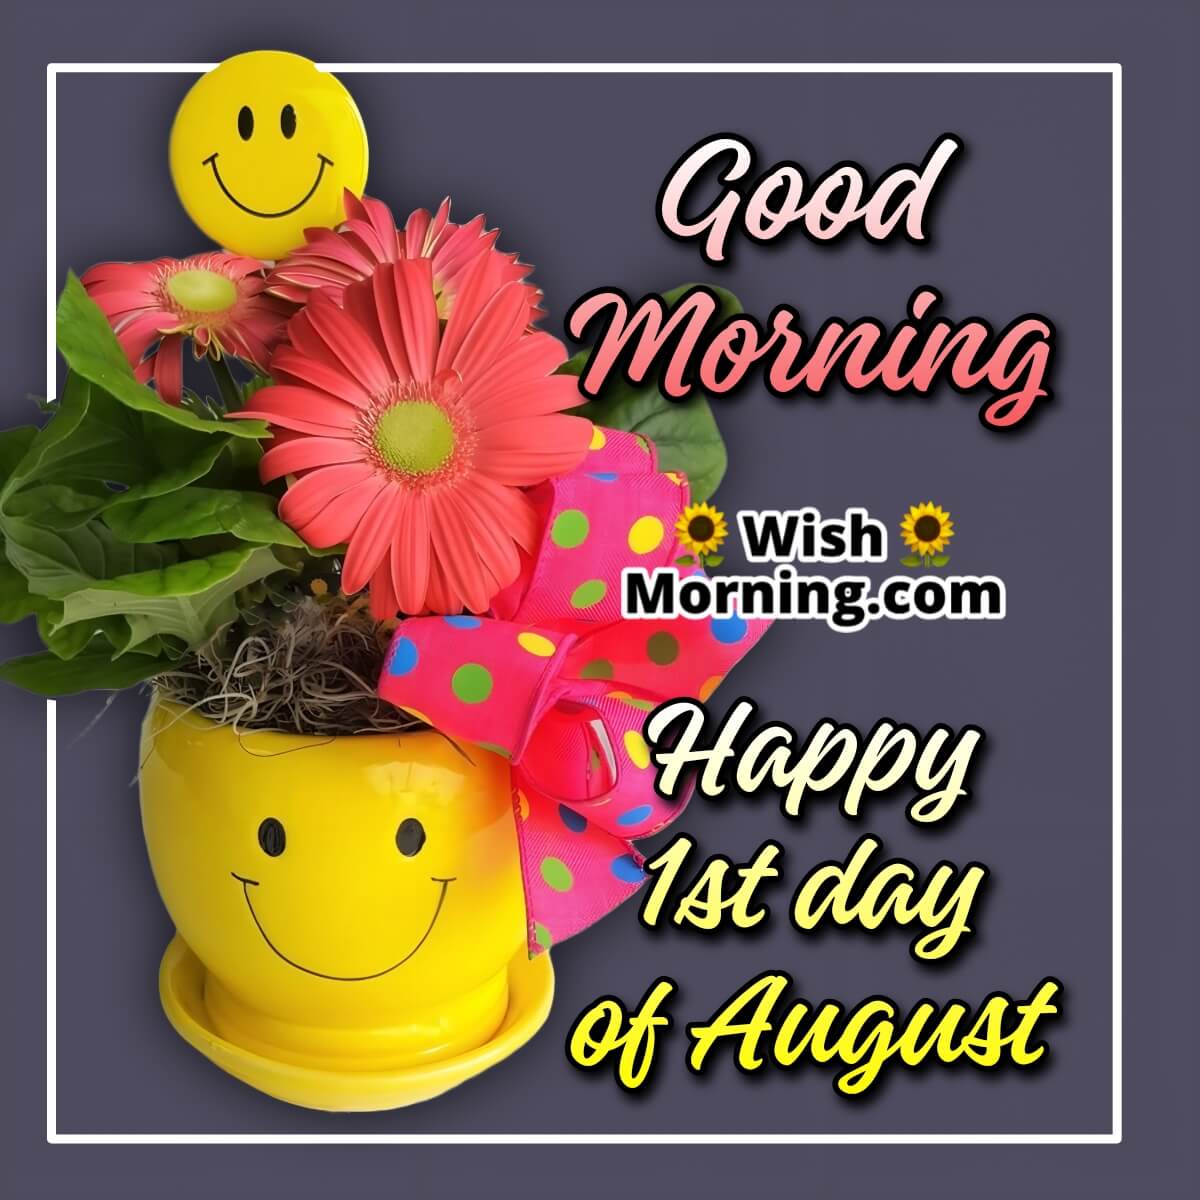 Good Morning Happy 1st Day Of August